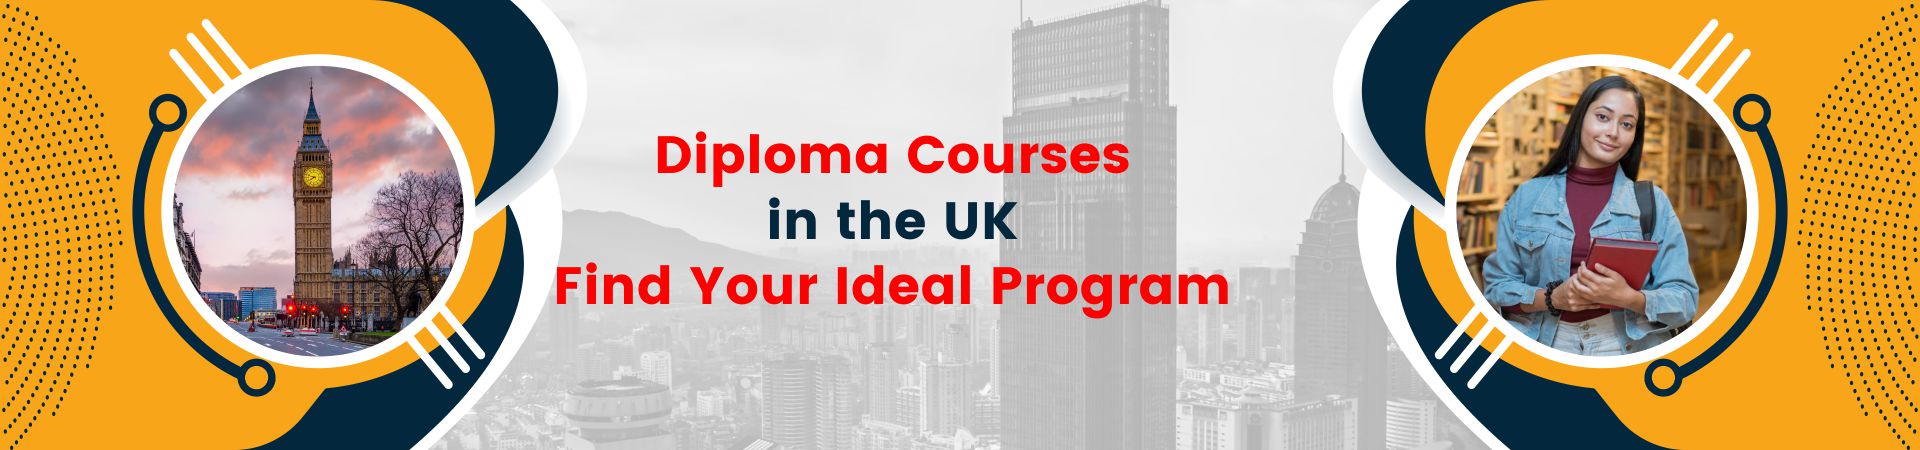 Diploma Courses in the UK - Find Your Ideal Program